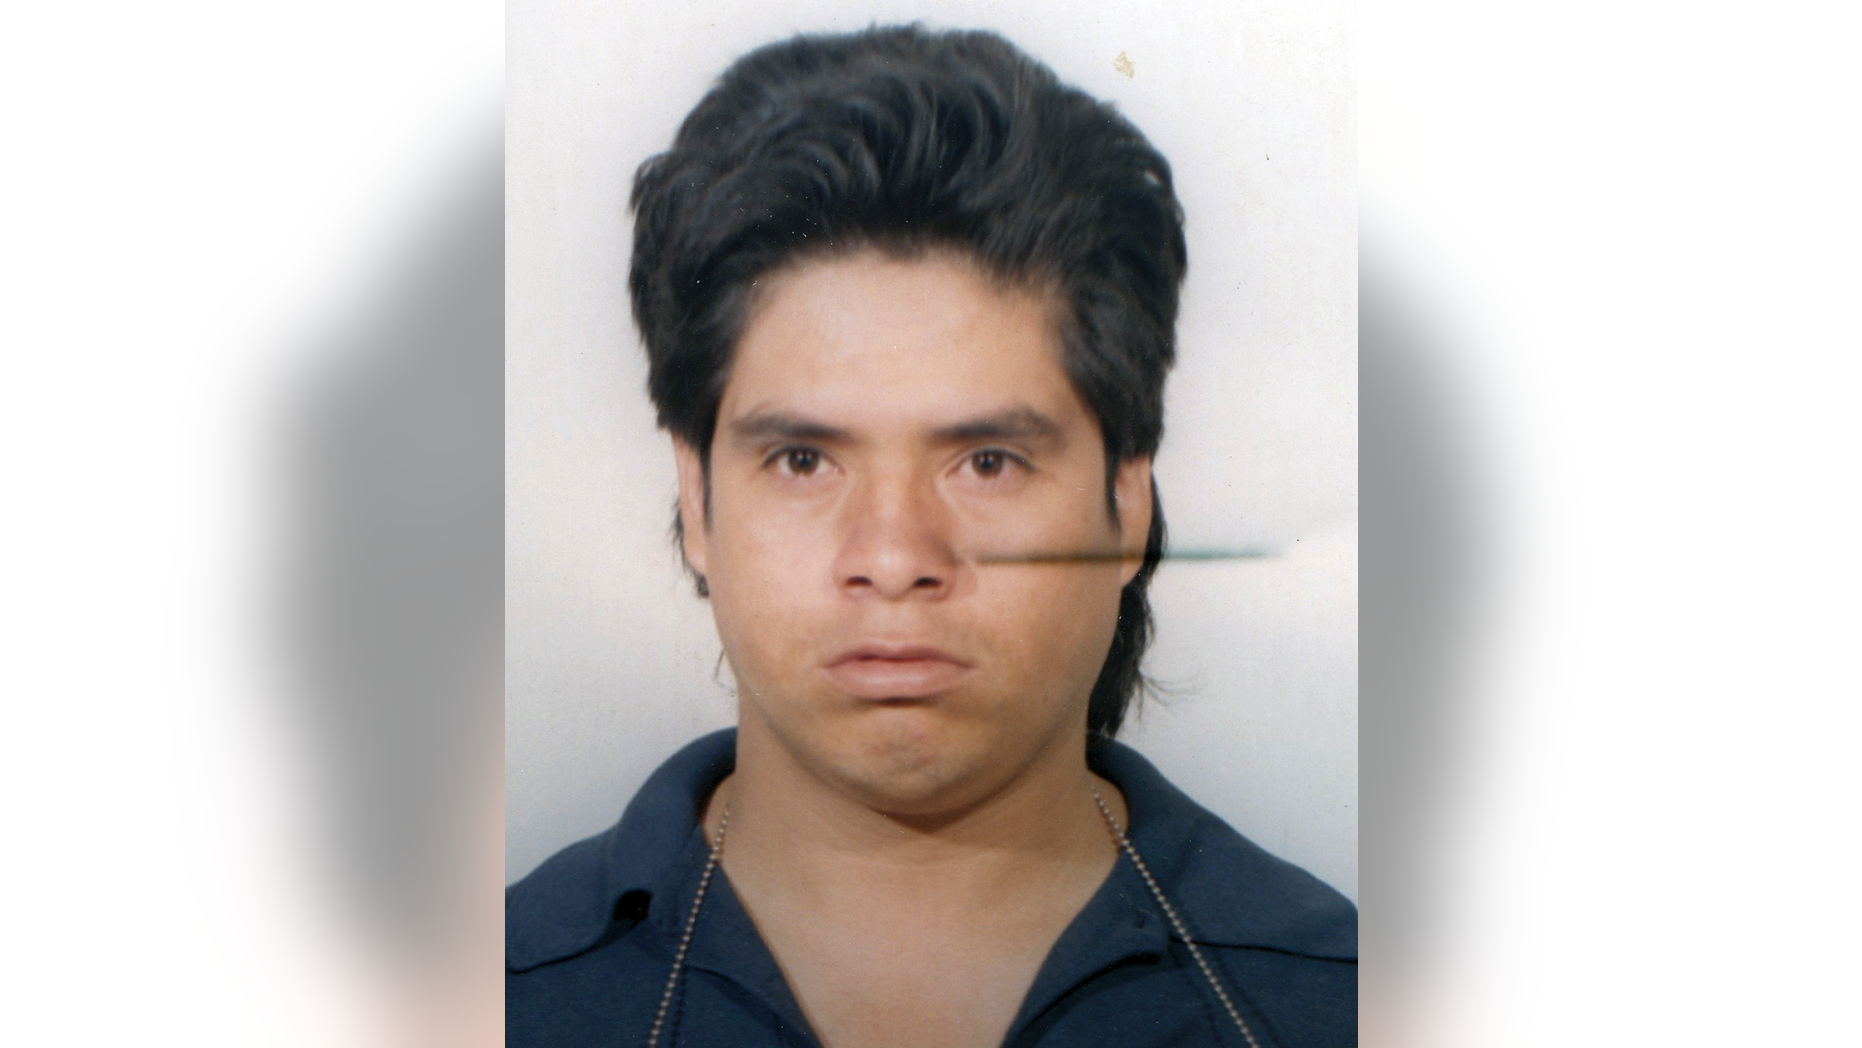 This 1993 photo published on Friday, February 15, 2019 by Norwalk Police Department, Connecticut, shows Landberto Quintero, whose remains were found on April 18, 1996 on Shea Island, Long Island Sound off the coast. of Connecticut. Police said Quintero had been identified through a new search in a fingerprint database updated by law enforcement. (Norwalk Police Department via AP)